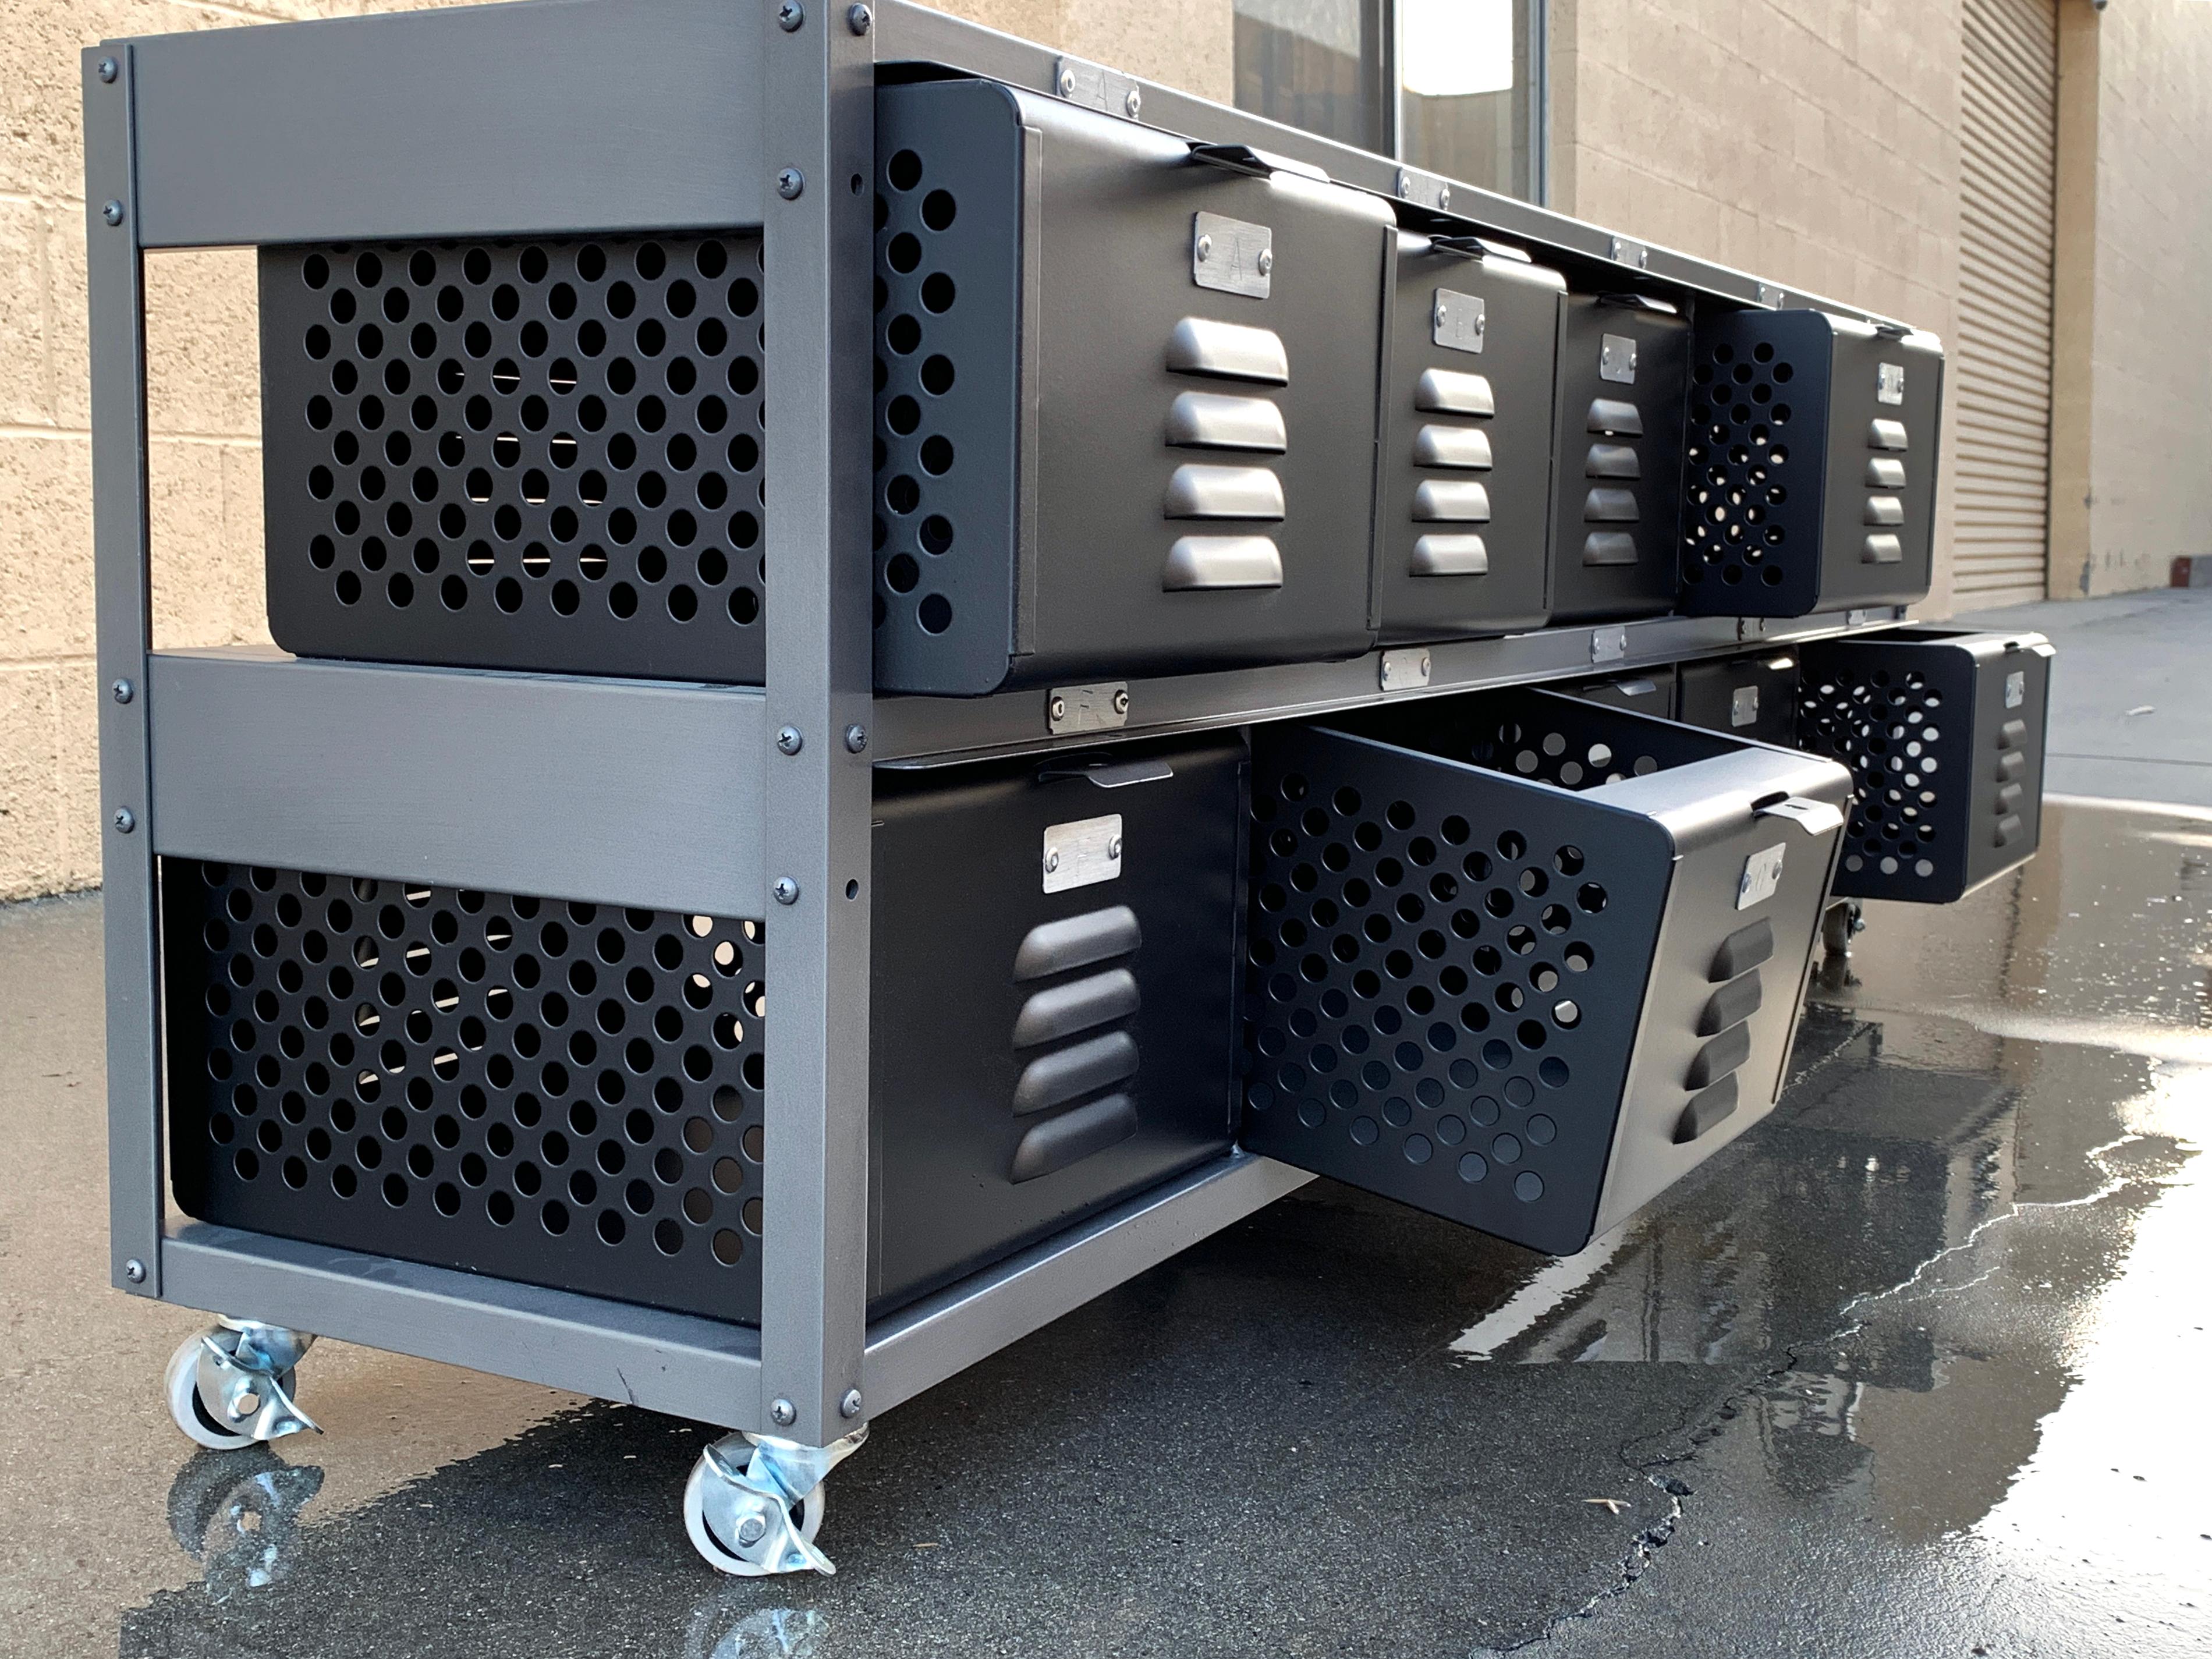 All new, custom fabricated 5 wide x 2 high locker basket unit inspired by those of the 1950s and 60s. Rolls on casters. Powder coated steel available in a range of fun colors- mix and match to your delight! Drawers feature capability to add